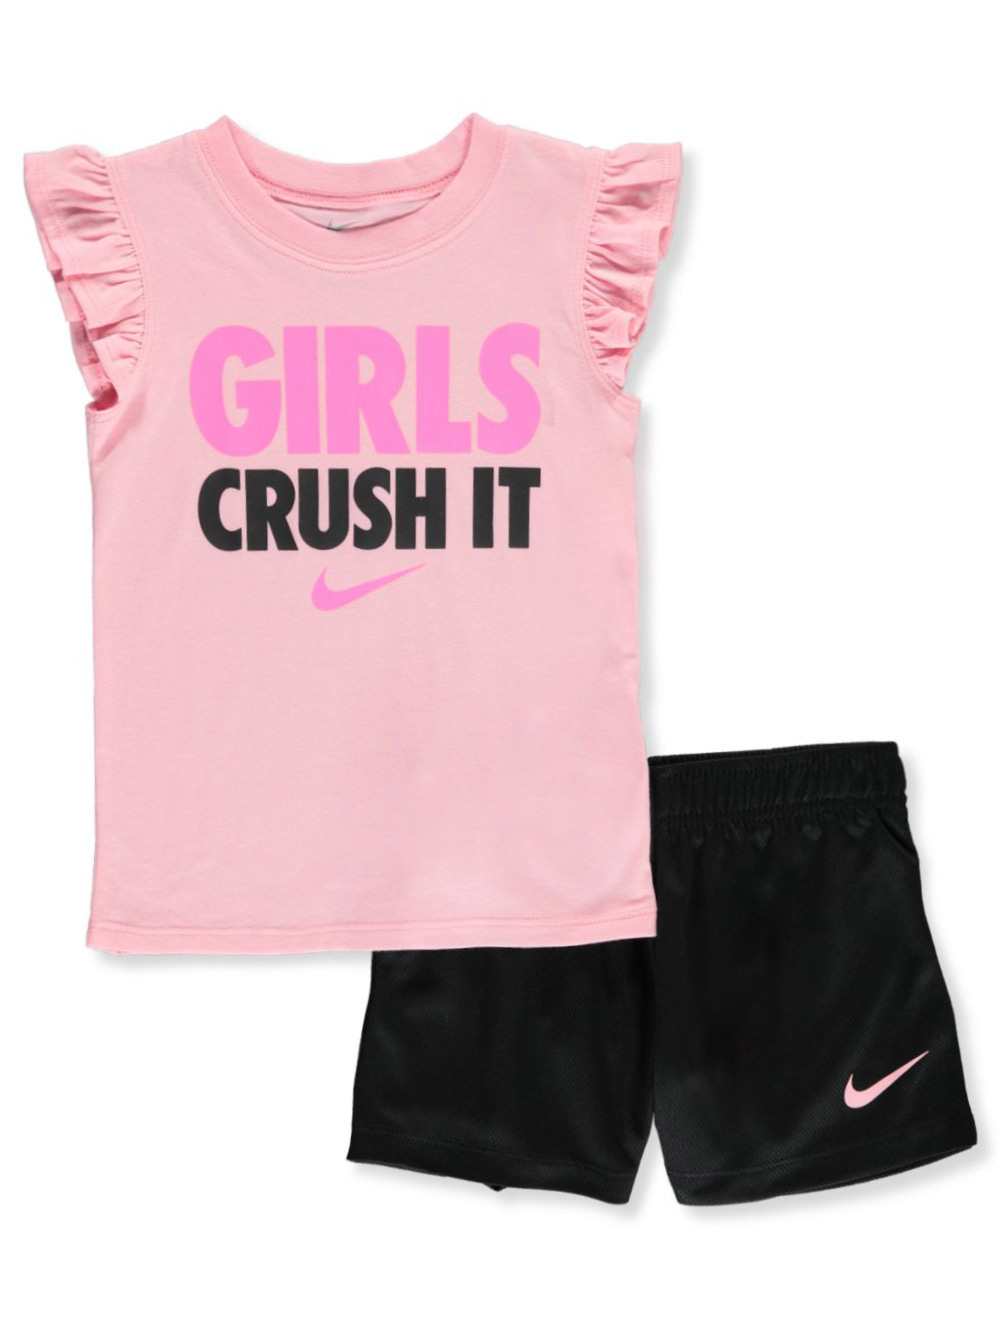 black and pink nike outfit